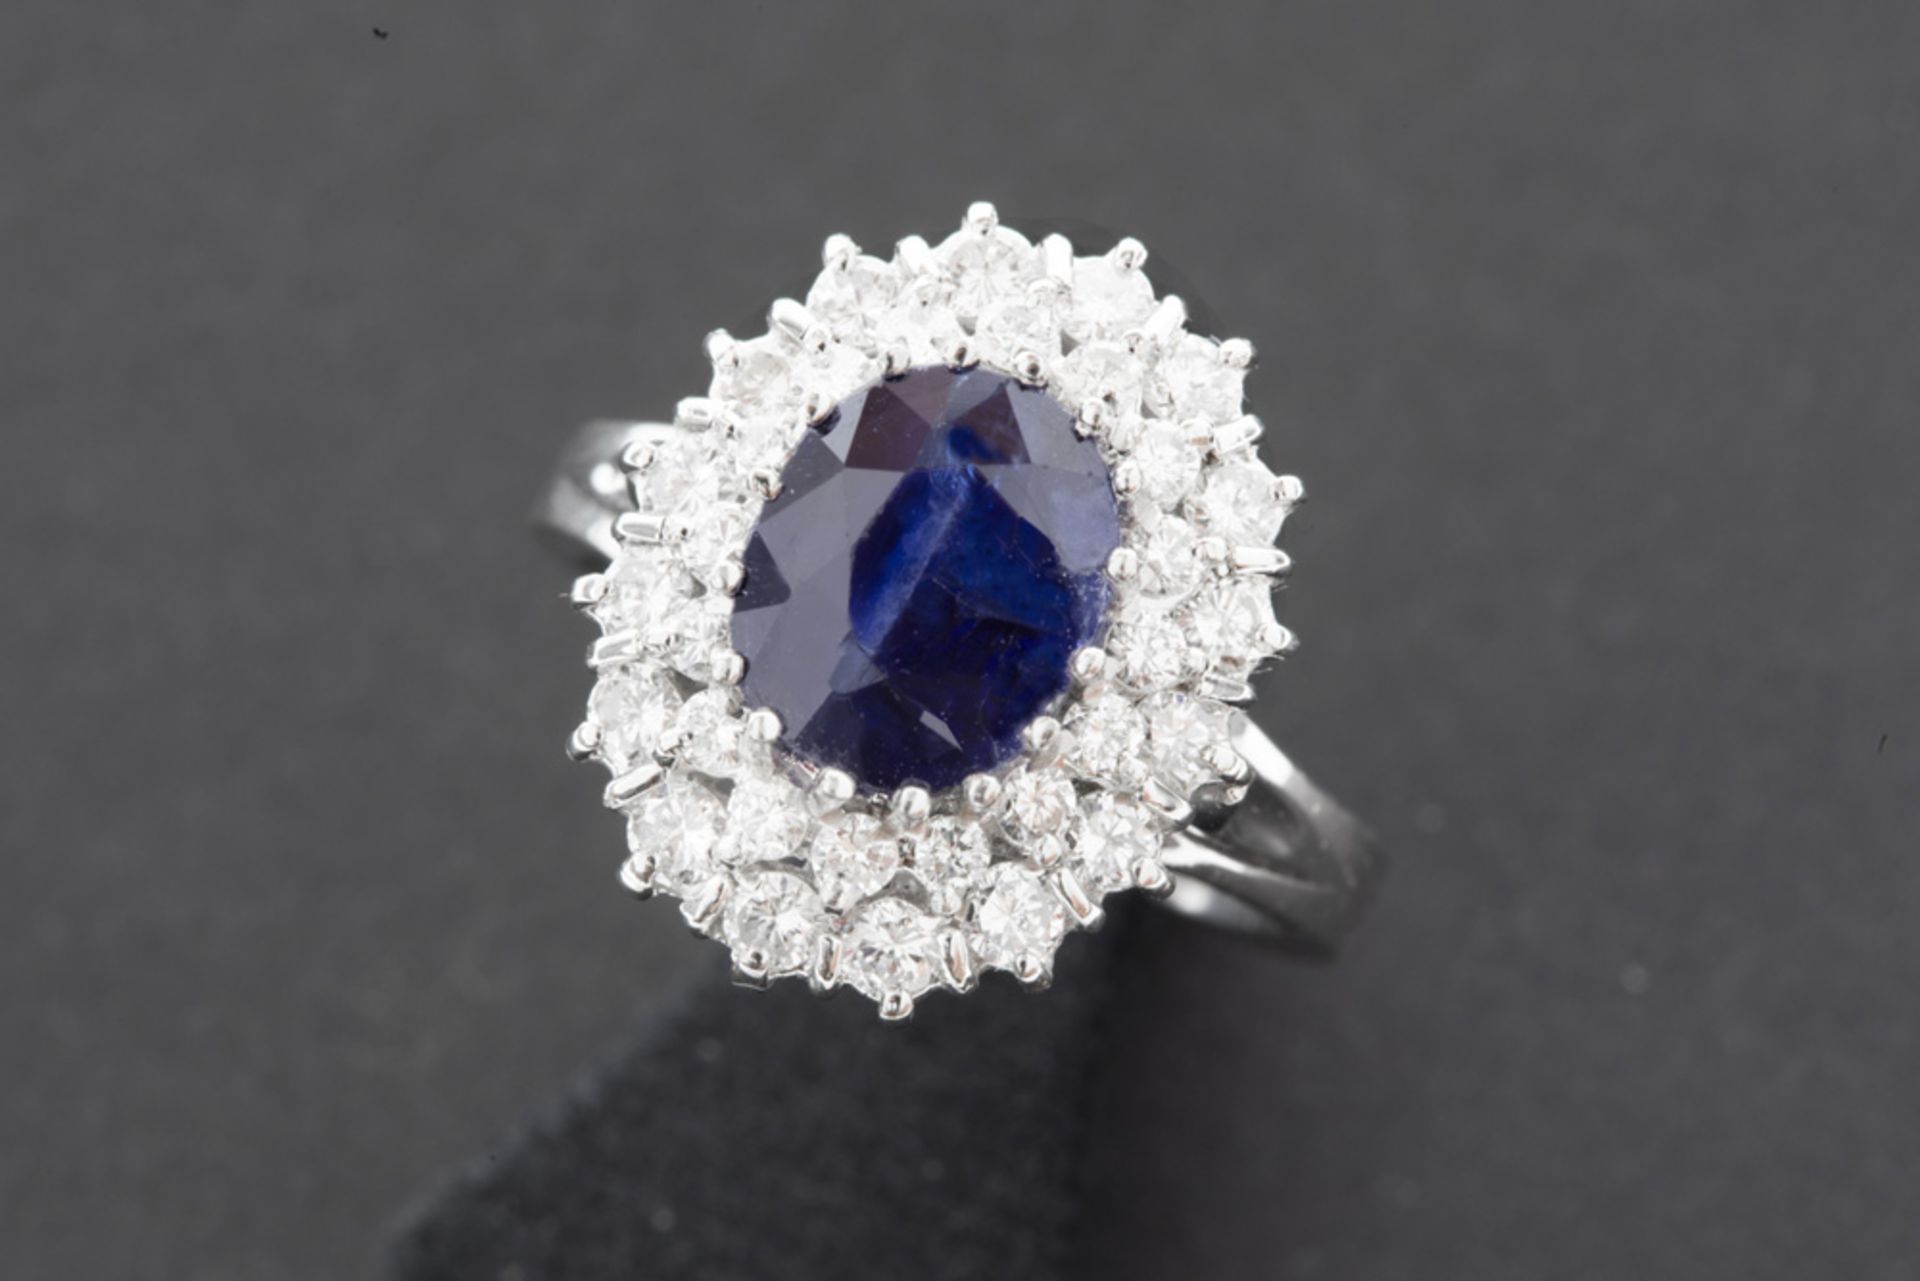 ring in white gold (18 carat) with a ca 2,80 carat sapphire surrounded by ca 1 carat of high quality